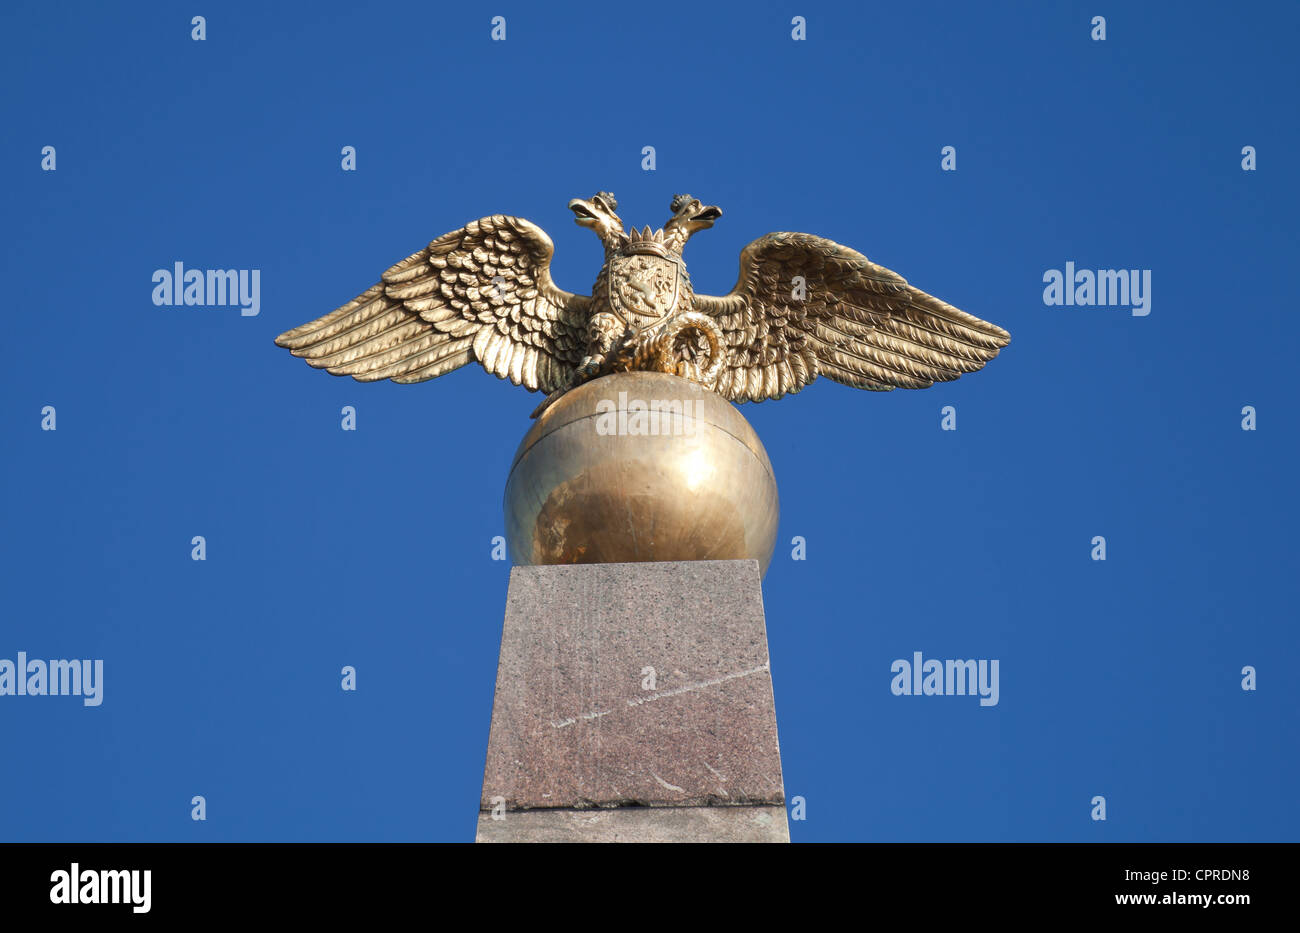 Double Eagle - Emblem of Russia on the monument in Helsinki, Finland Stock Photo